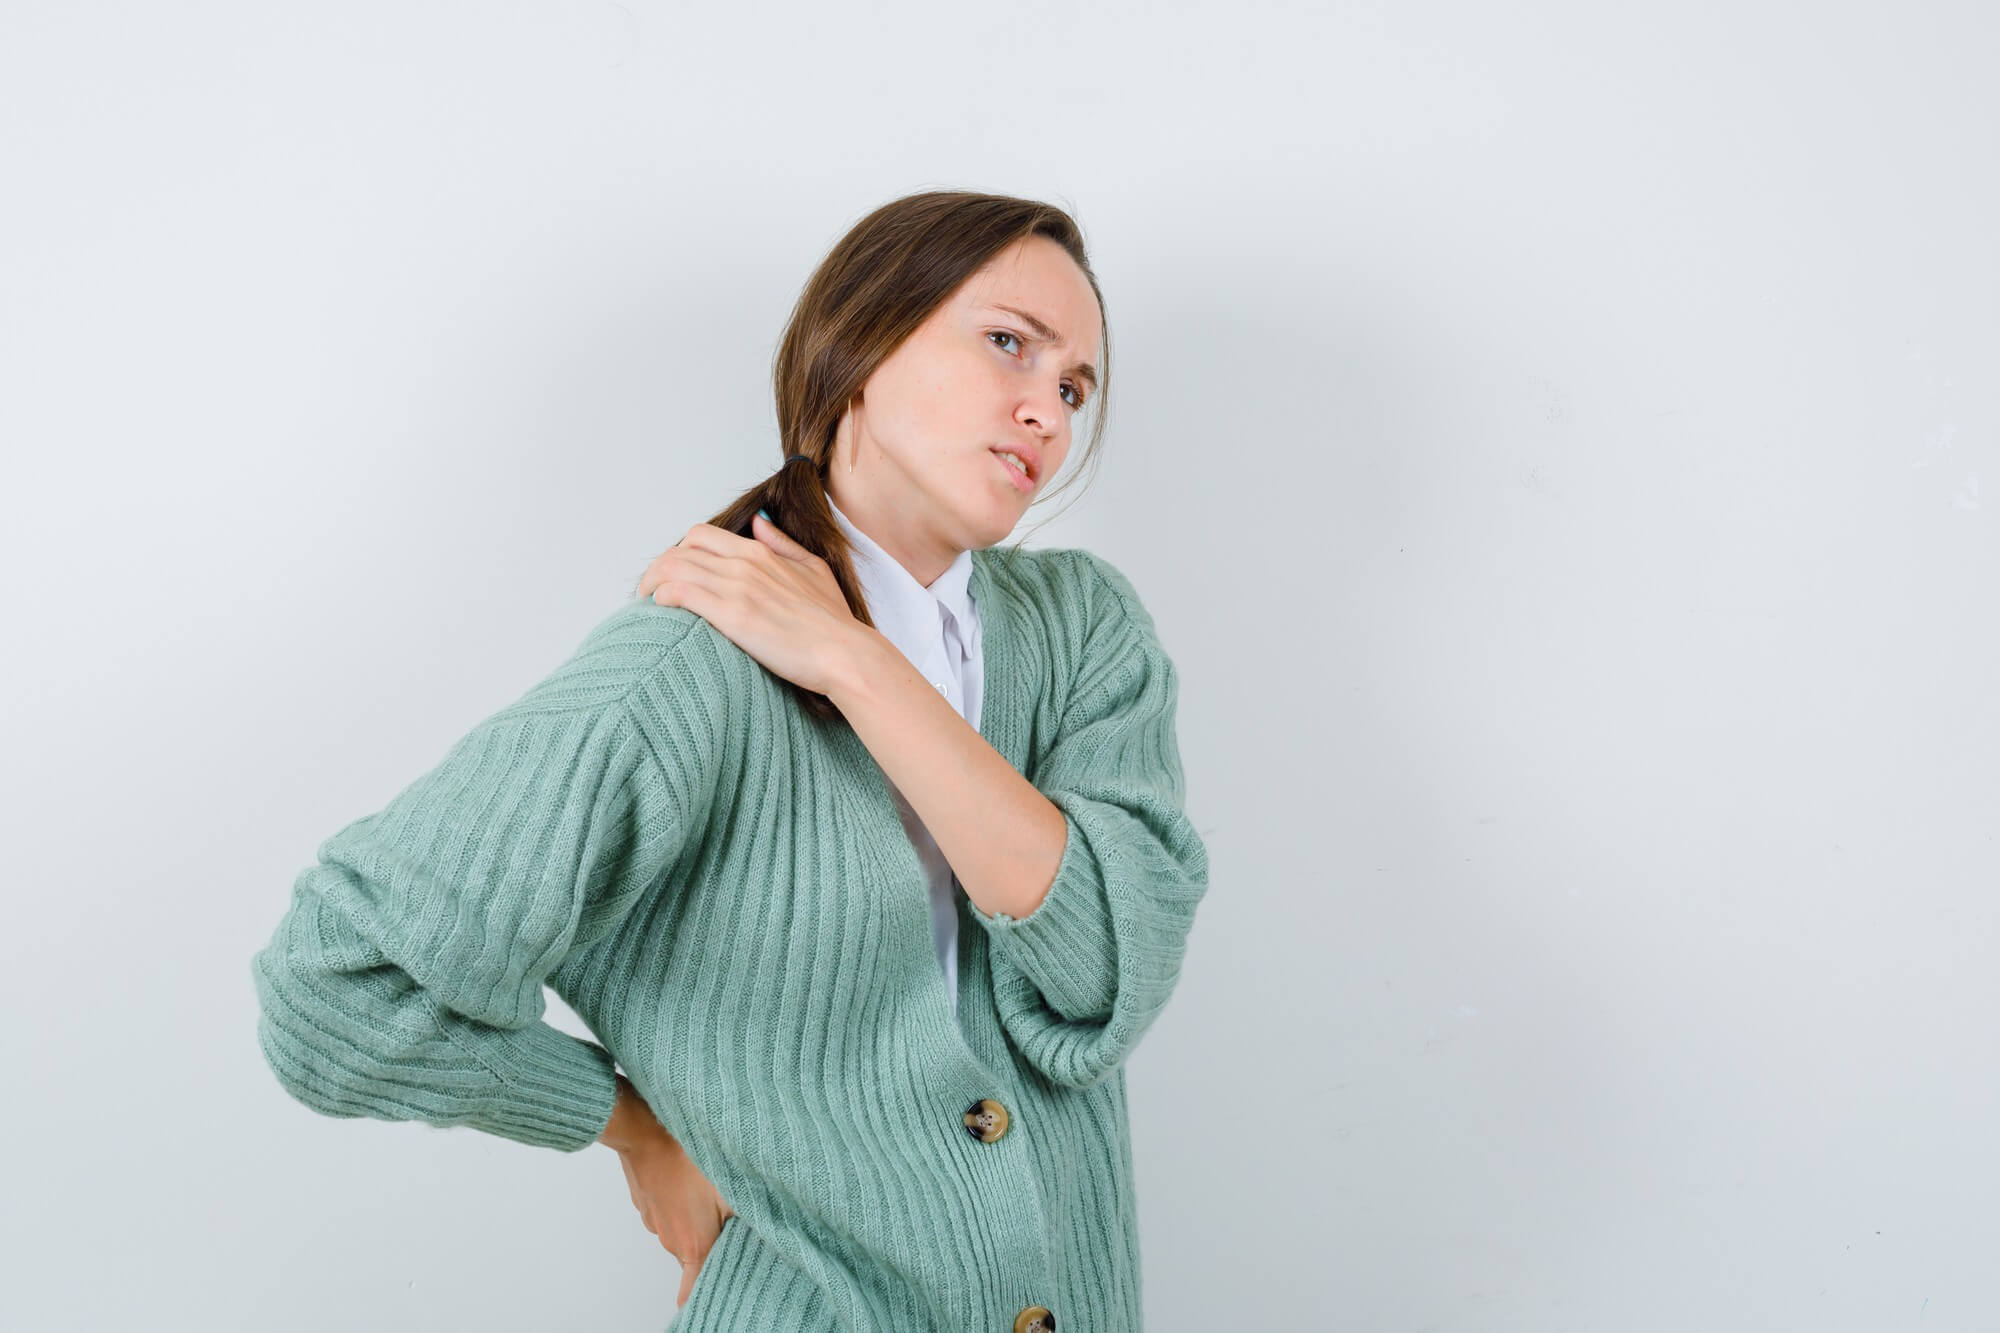 young-woman-blouse-cardigan-suffering-from-backache-looking-fatigued-front-view (1)